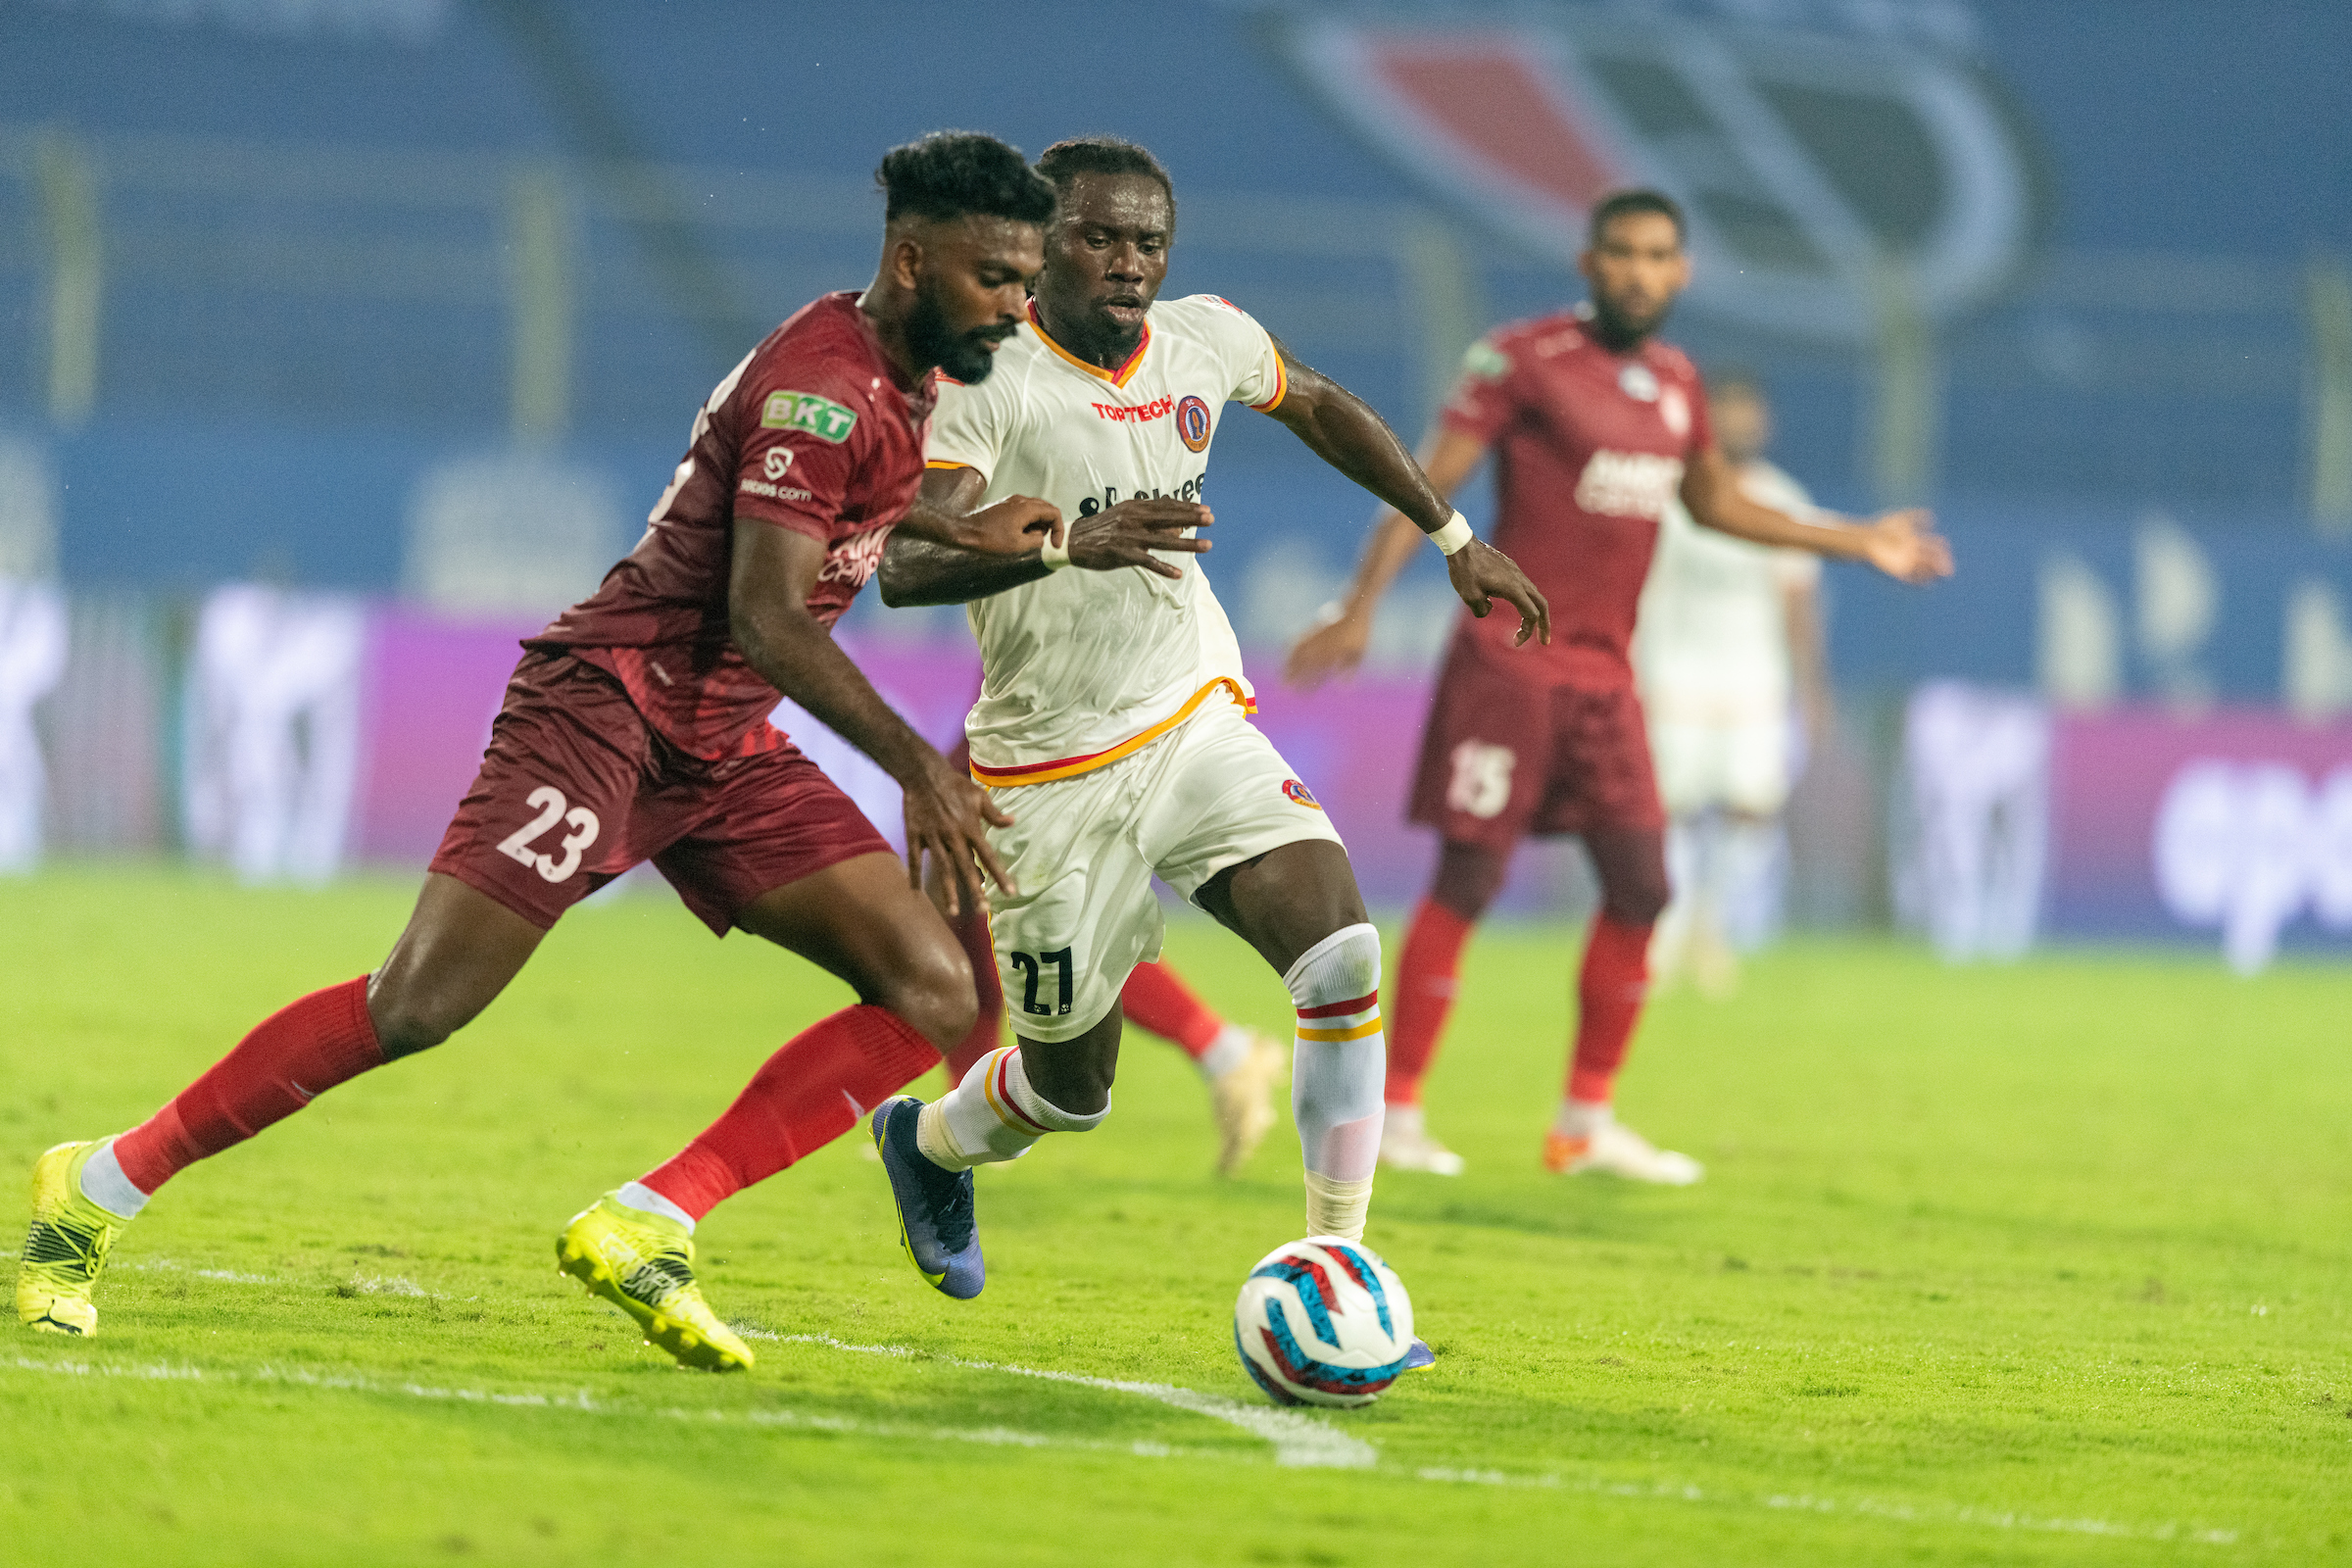 ISL 2021-22: SC East Bengal's Manolo Diaz not happy with the level of his team after 2-0 defeat against NorthEast United